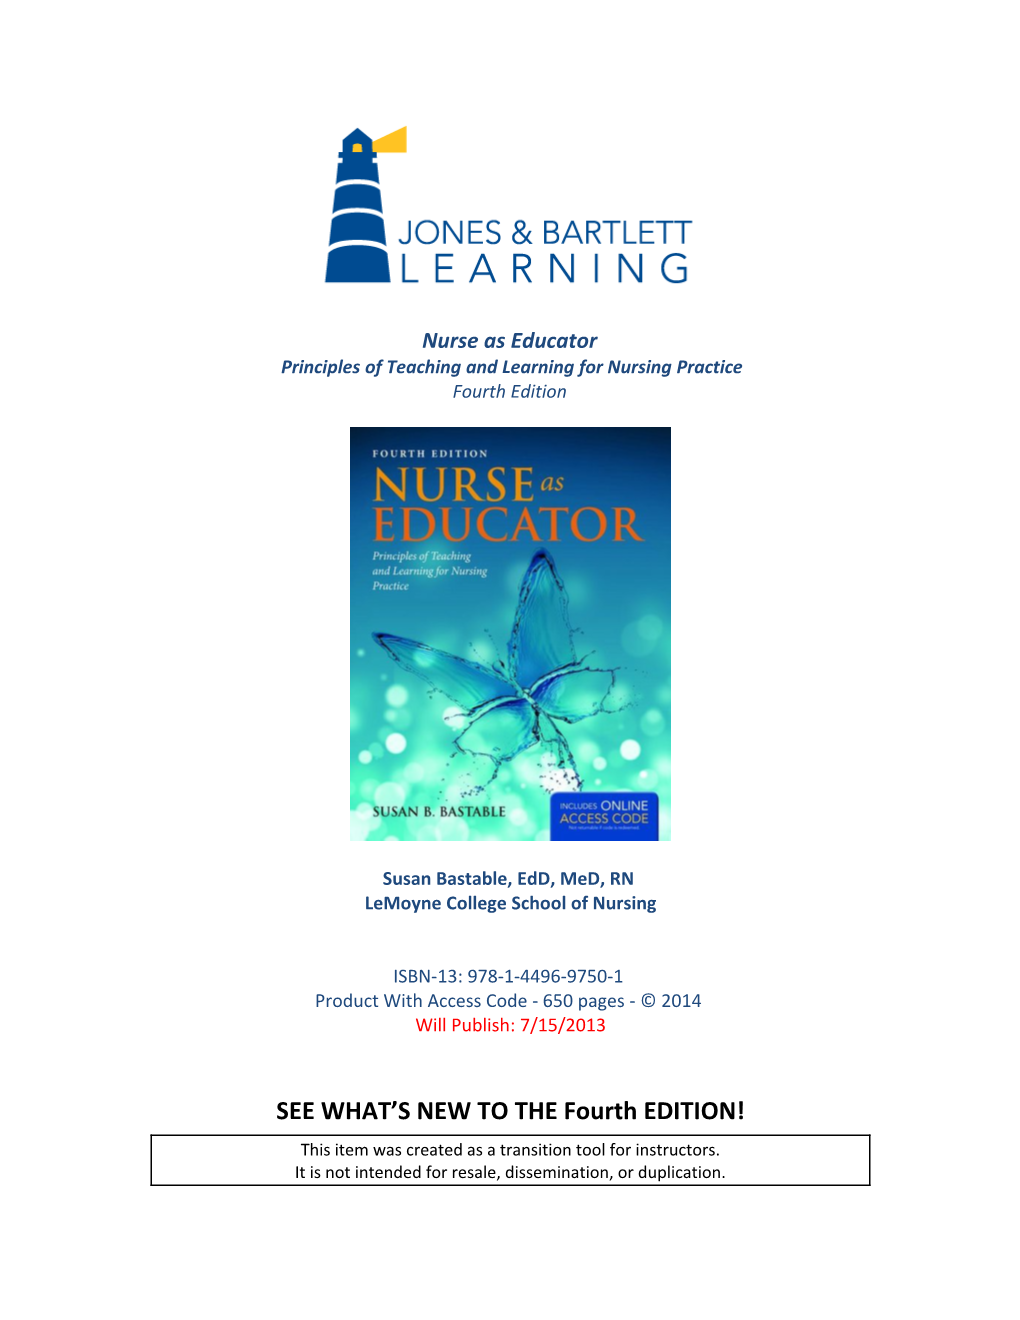 Nurse As Educator Principles of Teaching and Learning for Nursing Practice